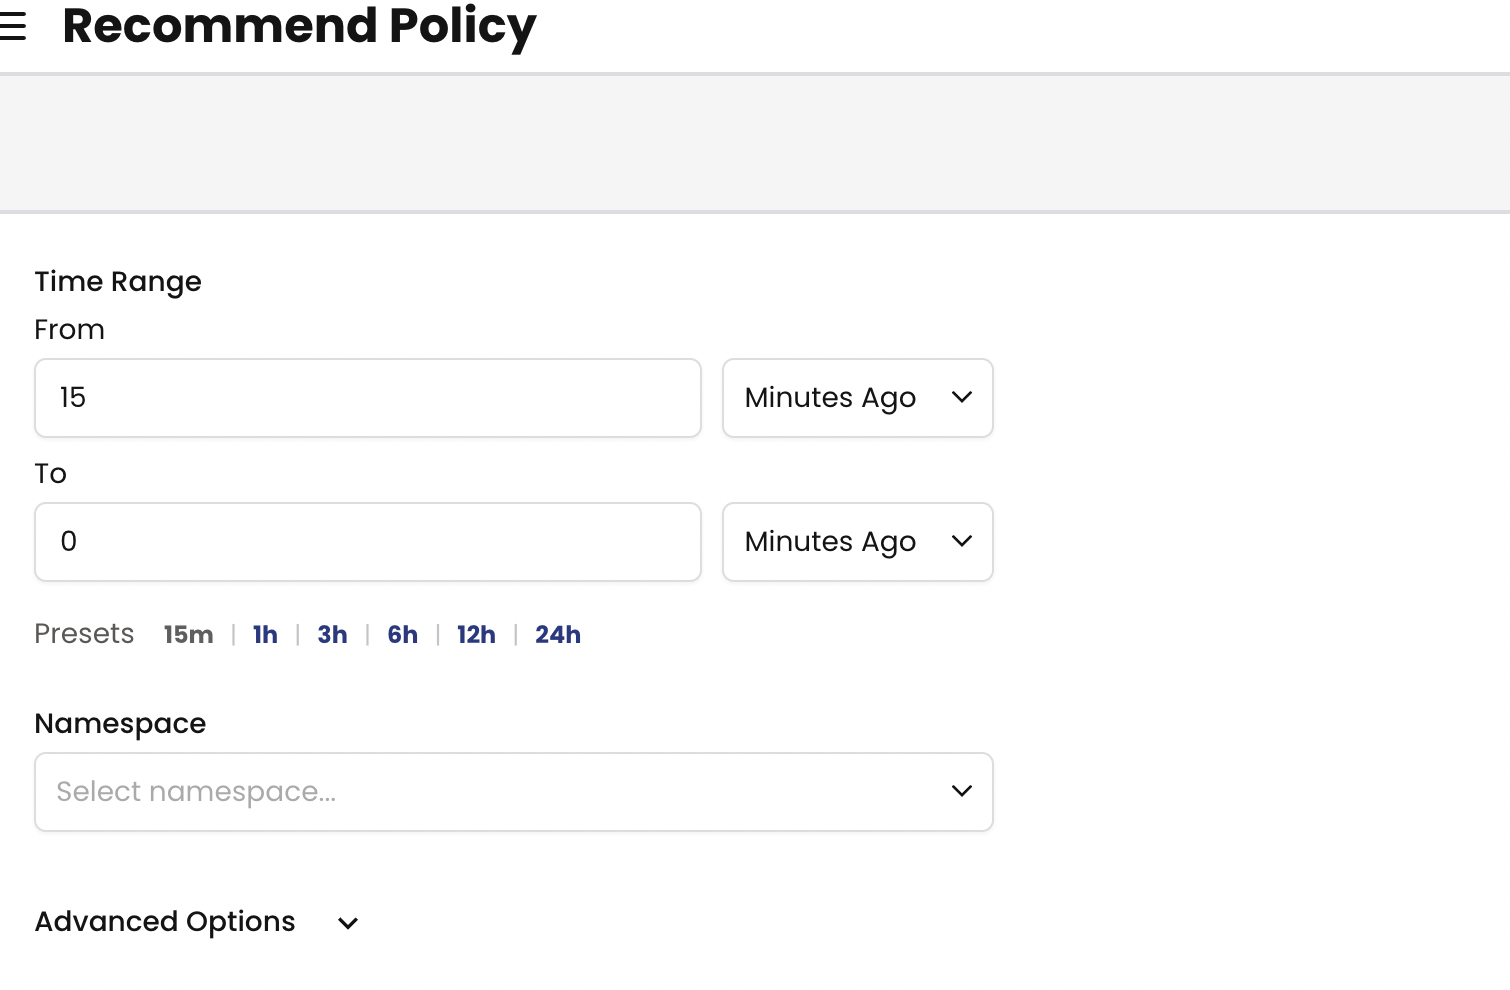 Create a Policy Recommendation